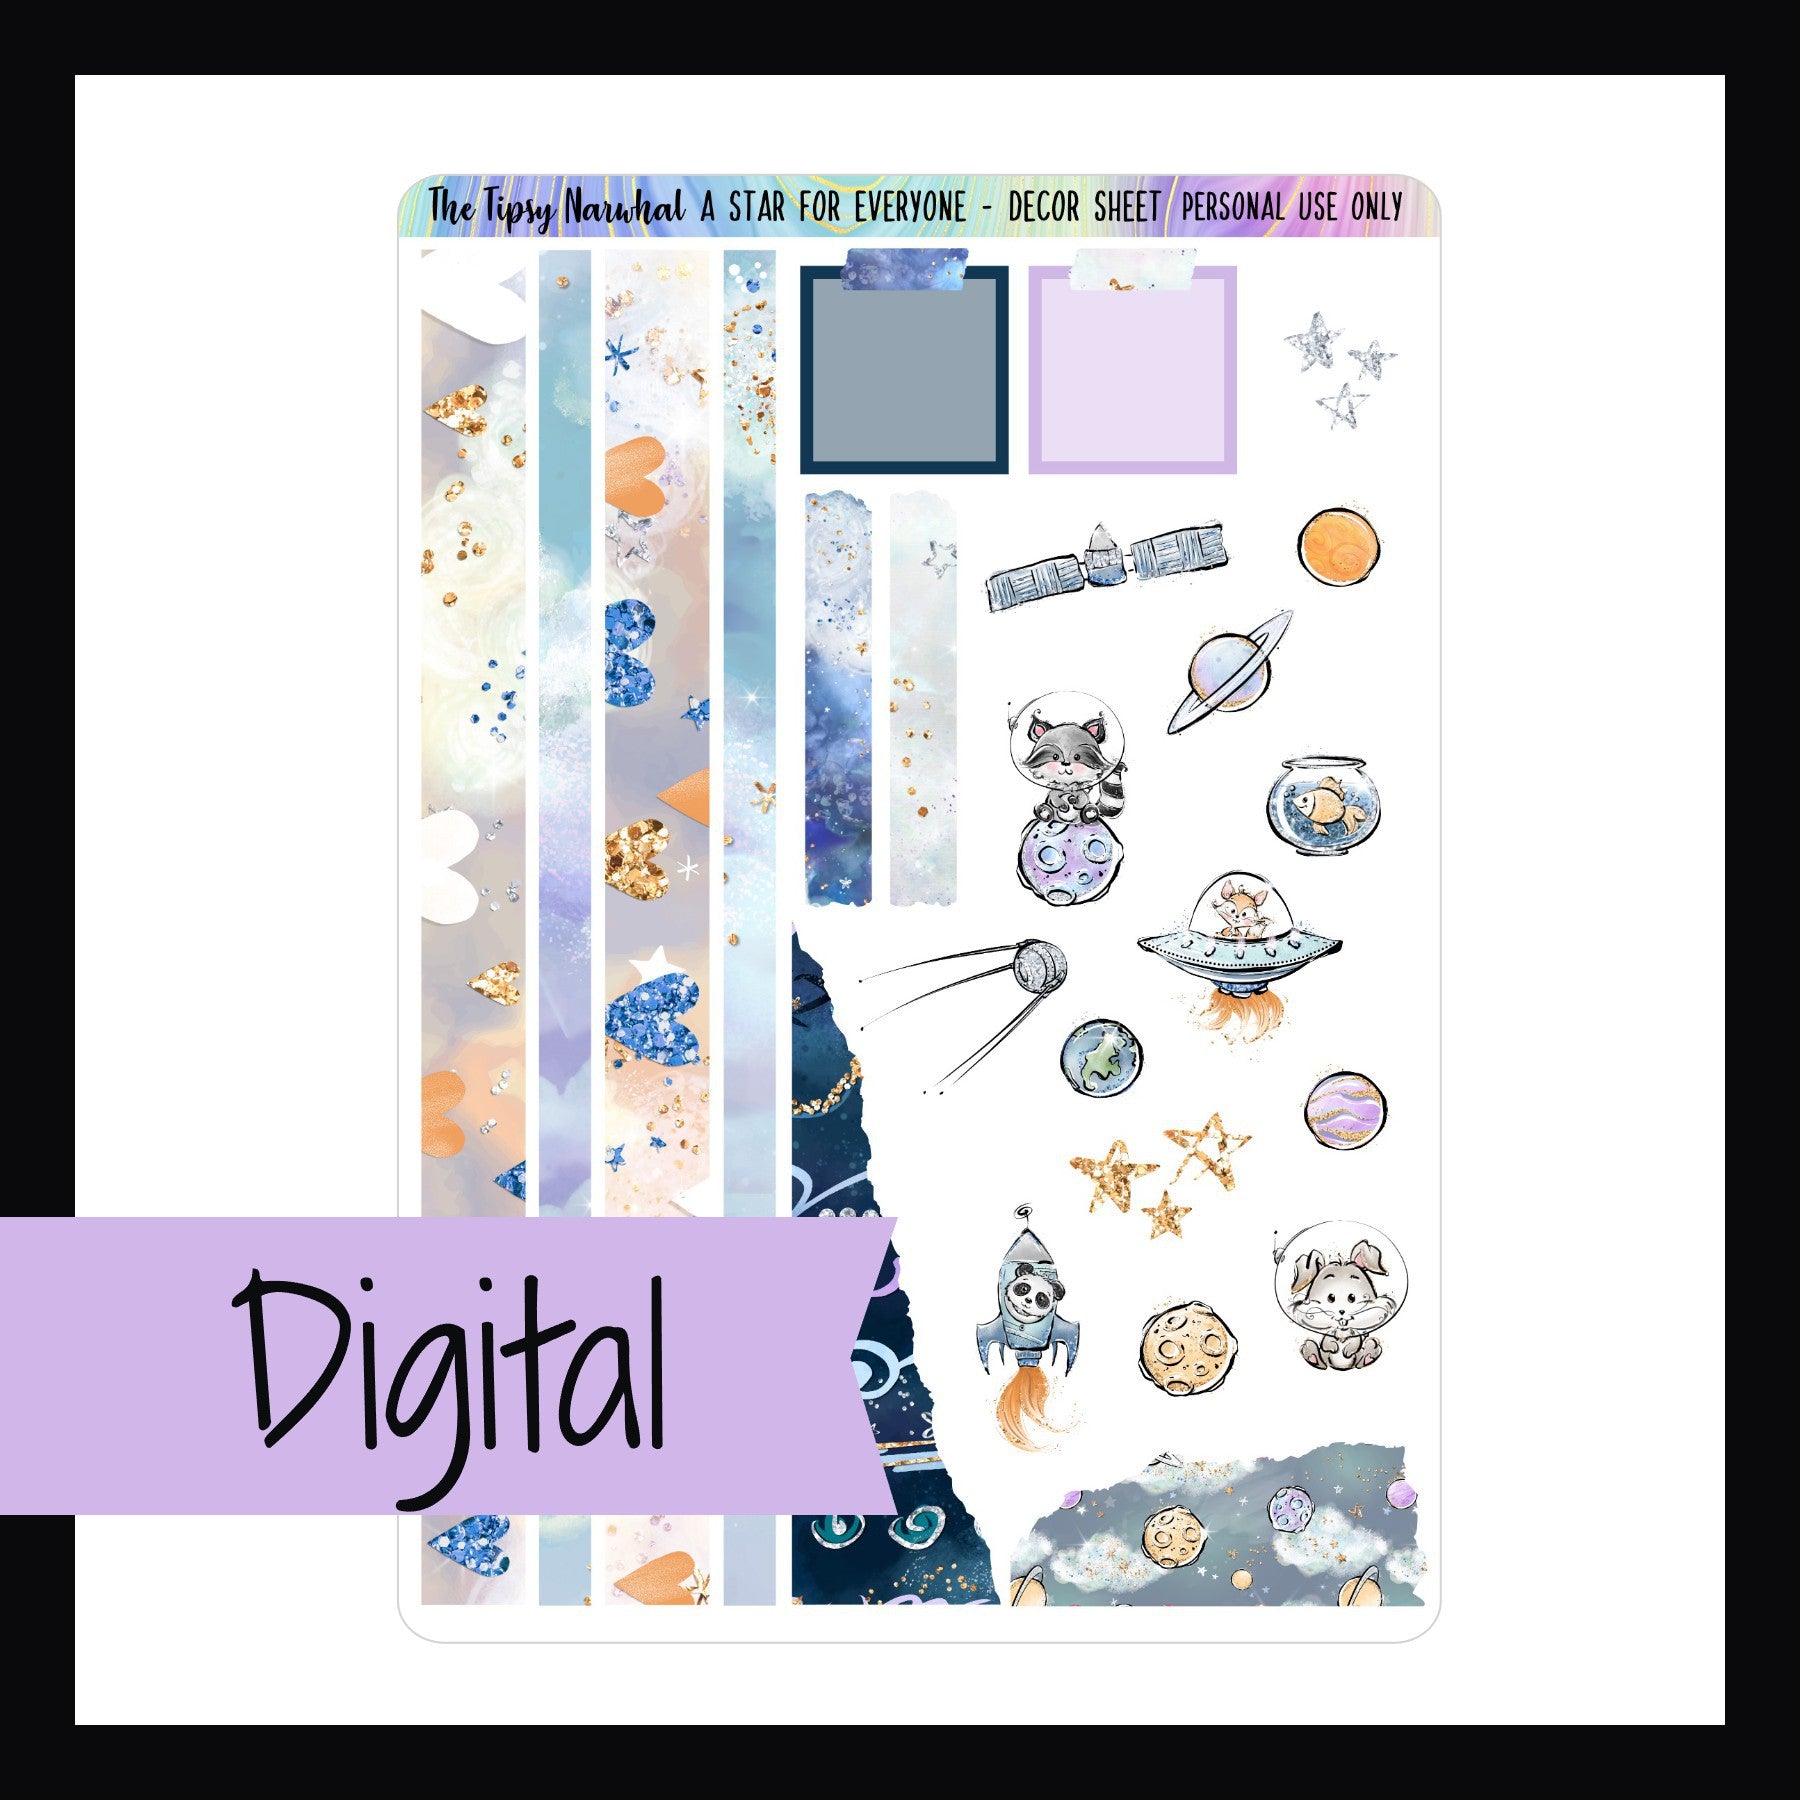 Digital A Star For Everyone Decor Sheet is a digital printable version of the A Star For Everyone Decor Sheet.  It features various woodland animals venturing into space.